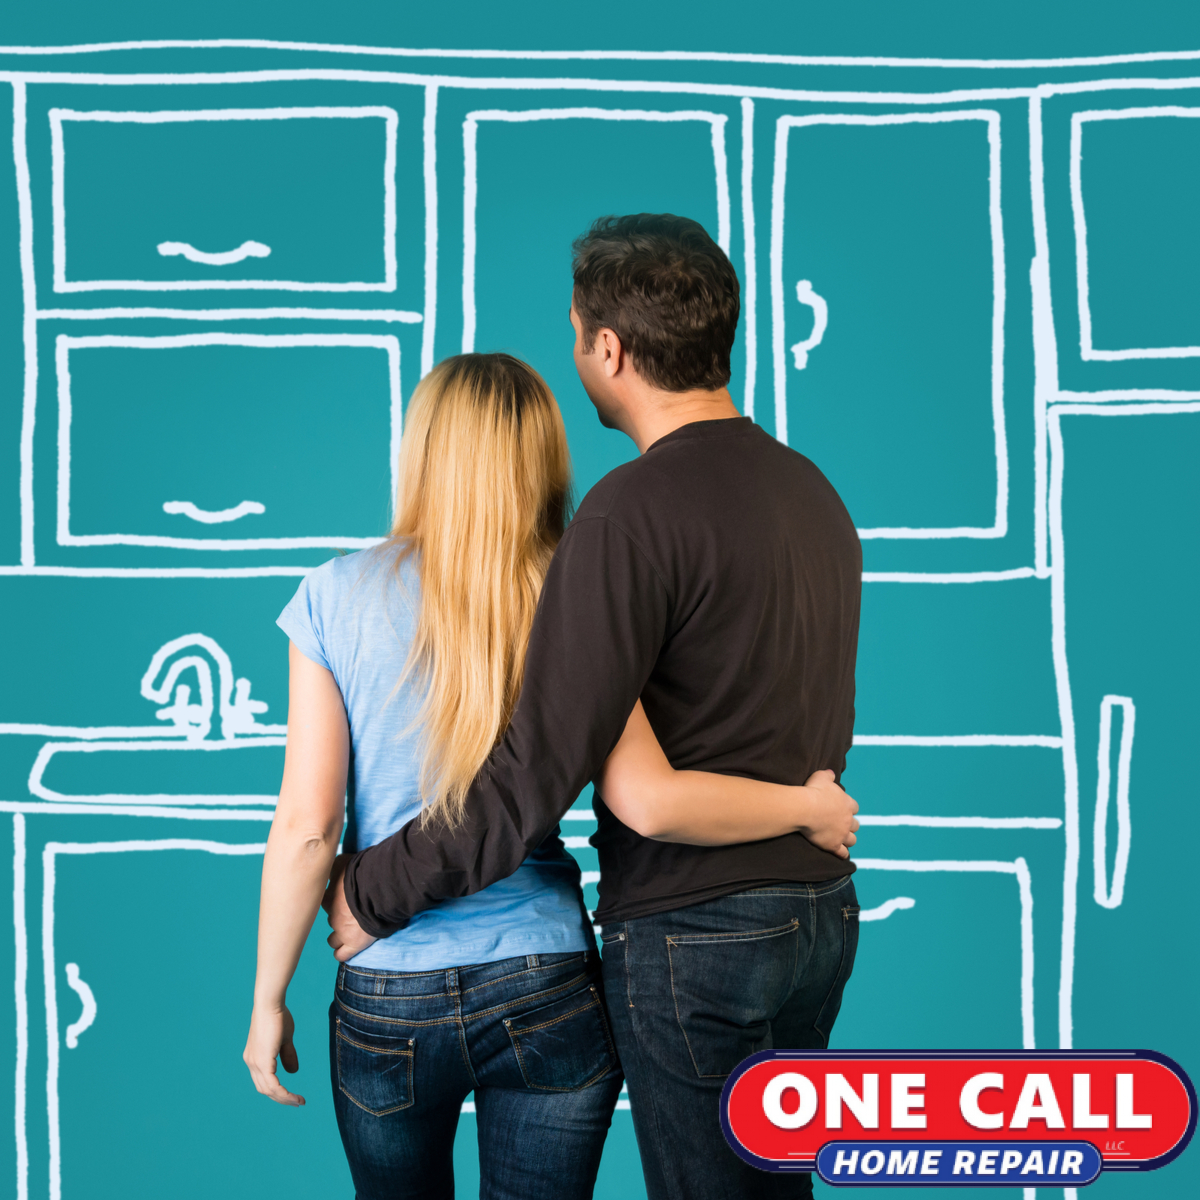 Let One Call Home Repair Help You with Kitchen and Bathroom Remodels!